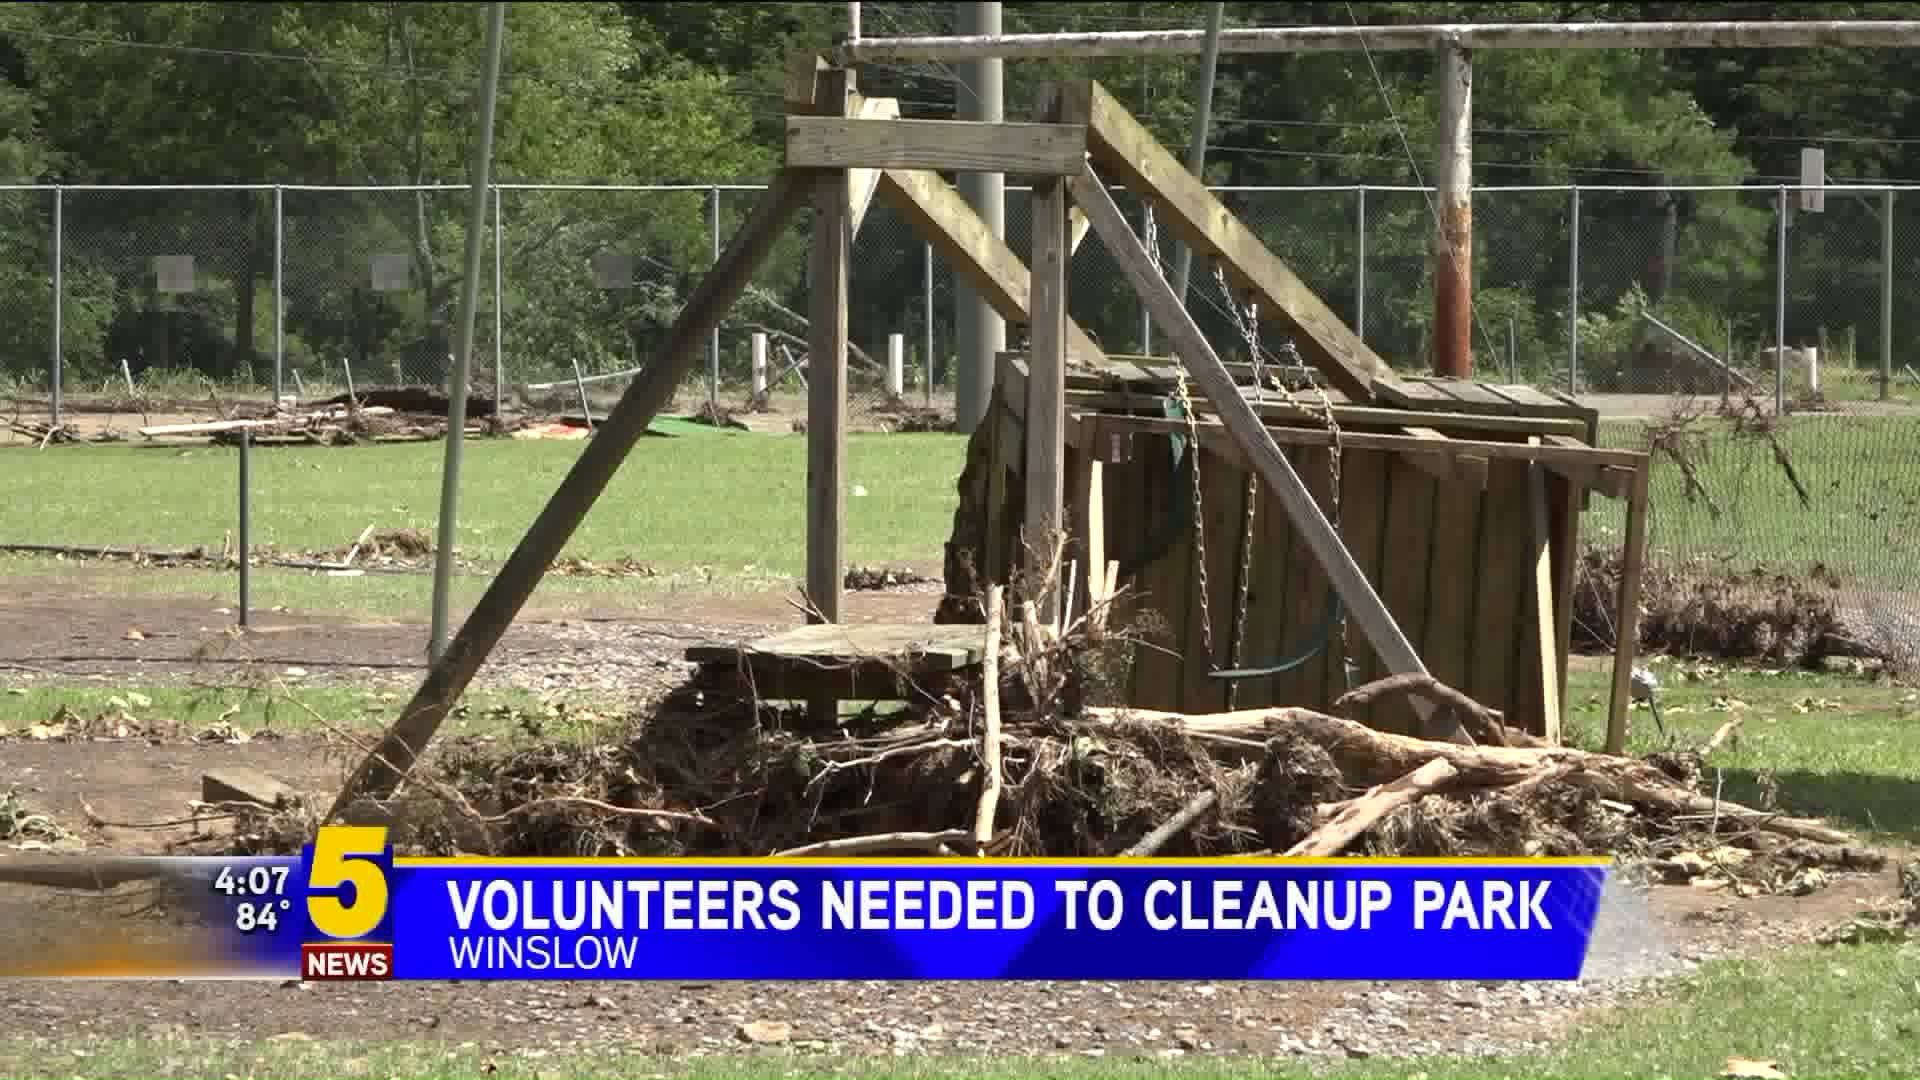 Volunteers Needed To Help Cleanup Winslow Park Ahead Of 4th Of July